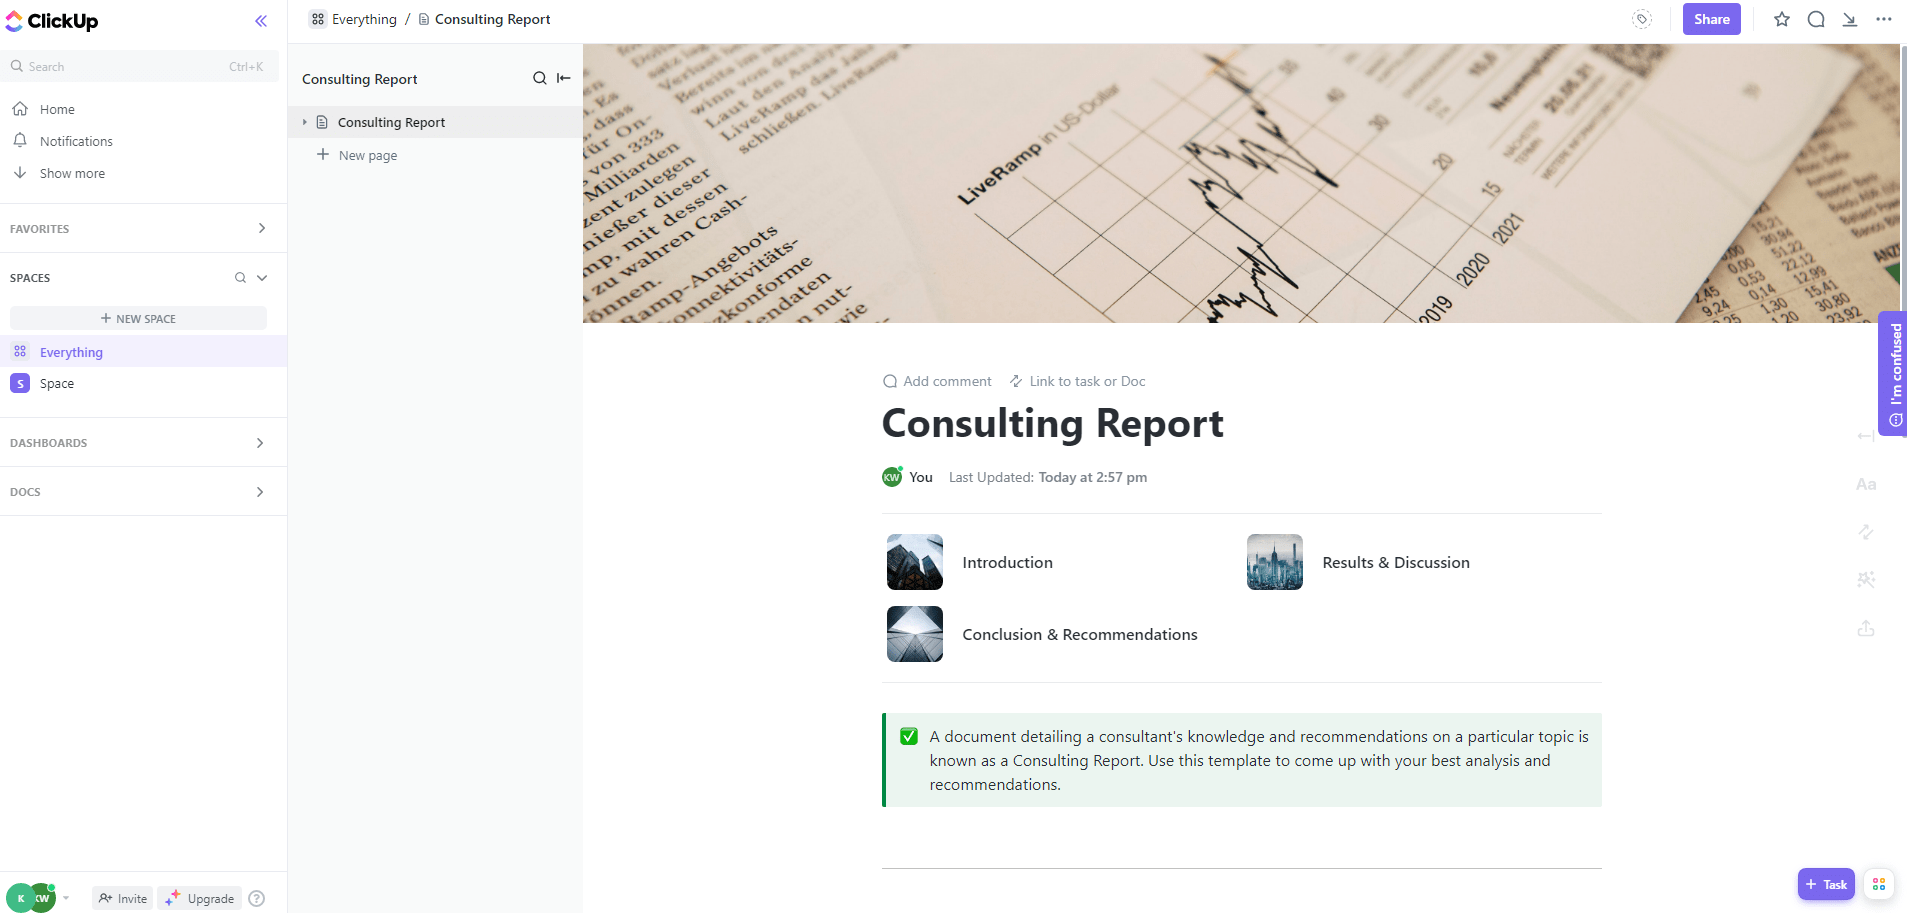 ClickUp's Consulting Report Template is designed to help you generate professional reports for clients.